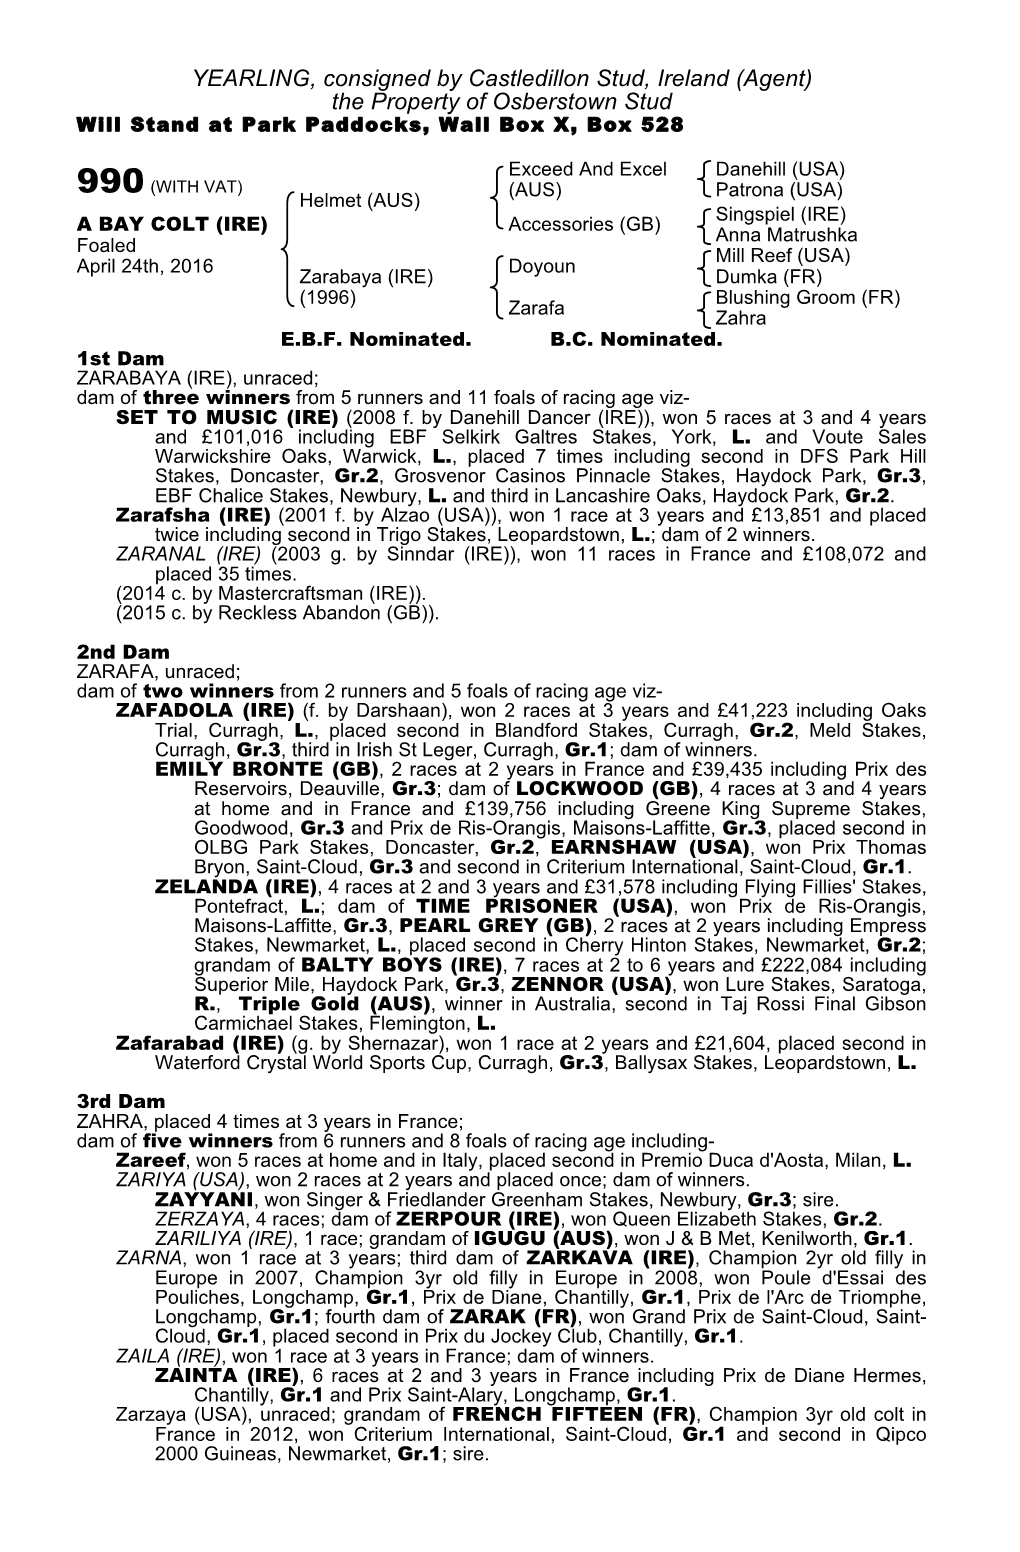 YEARLING, Consigned by Castledillon Stud, Ireland (Agent) the Property of Osberstown Stud Will Stand at Park Paddocks, Wall Box X, Box 528